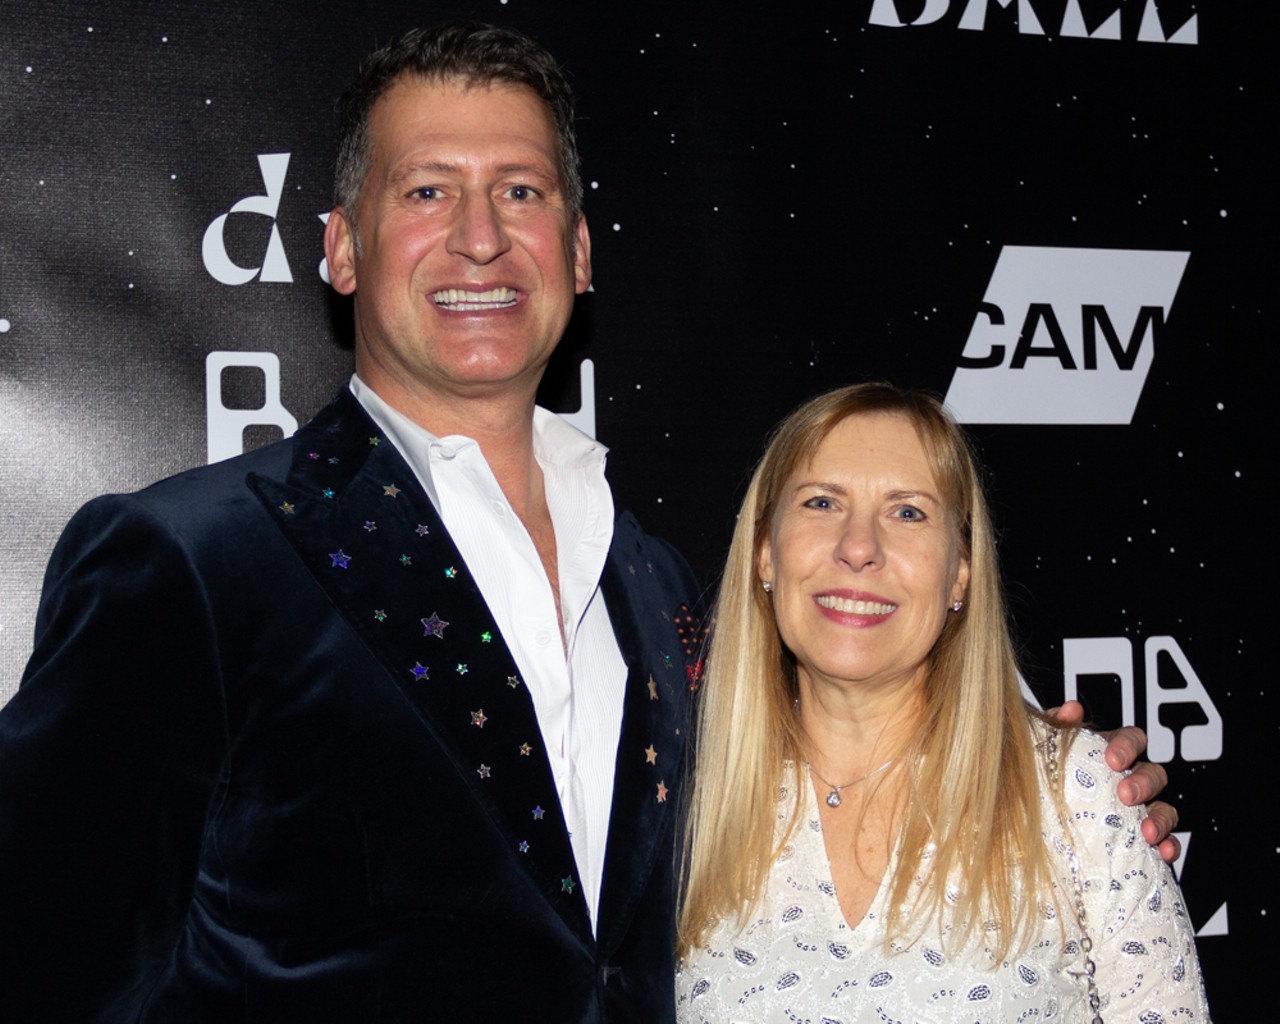 CAM's Dada Ball & Bash Were Out of This World in 2019